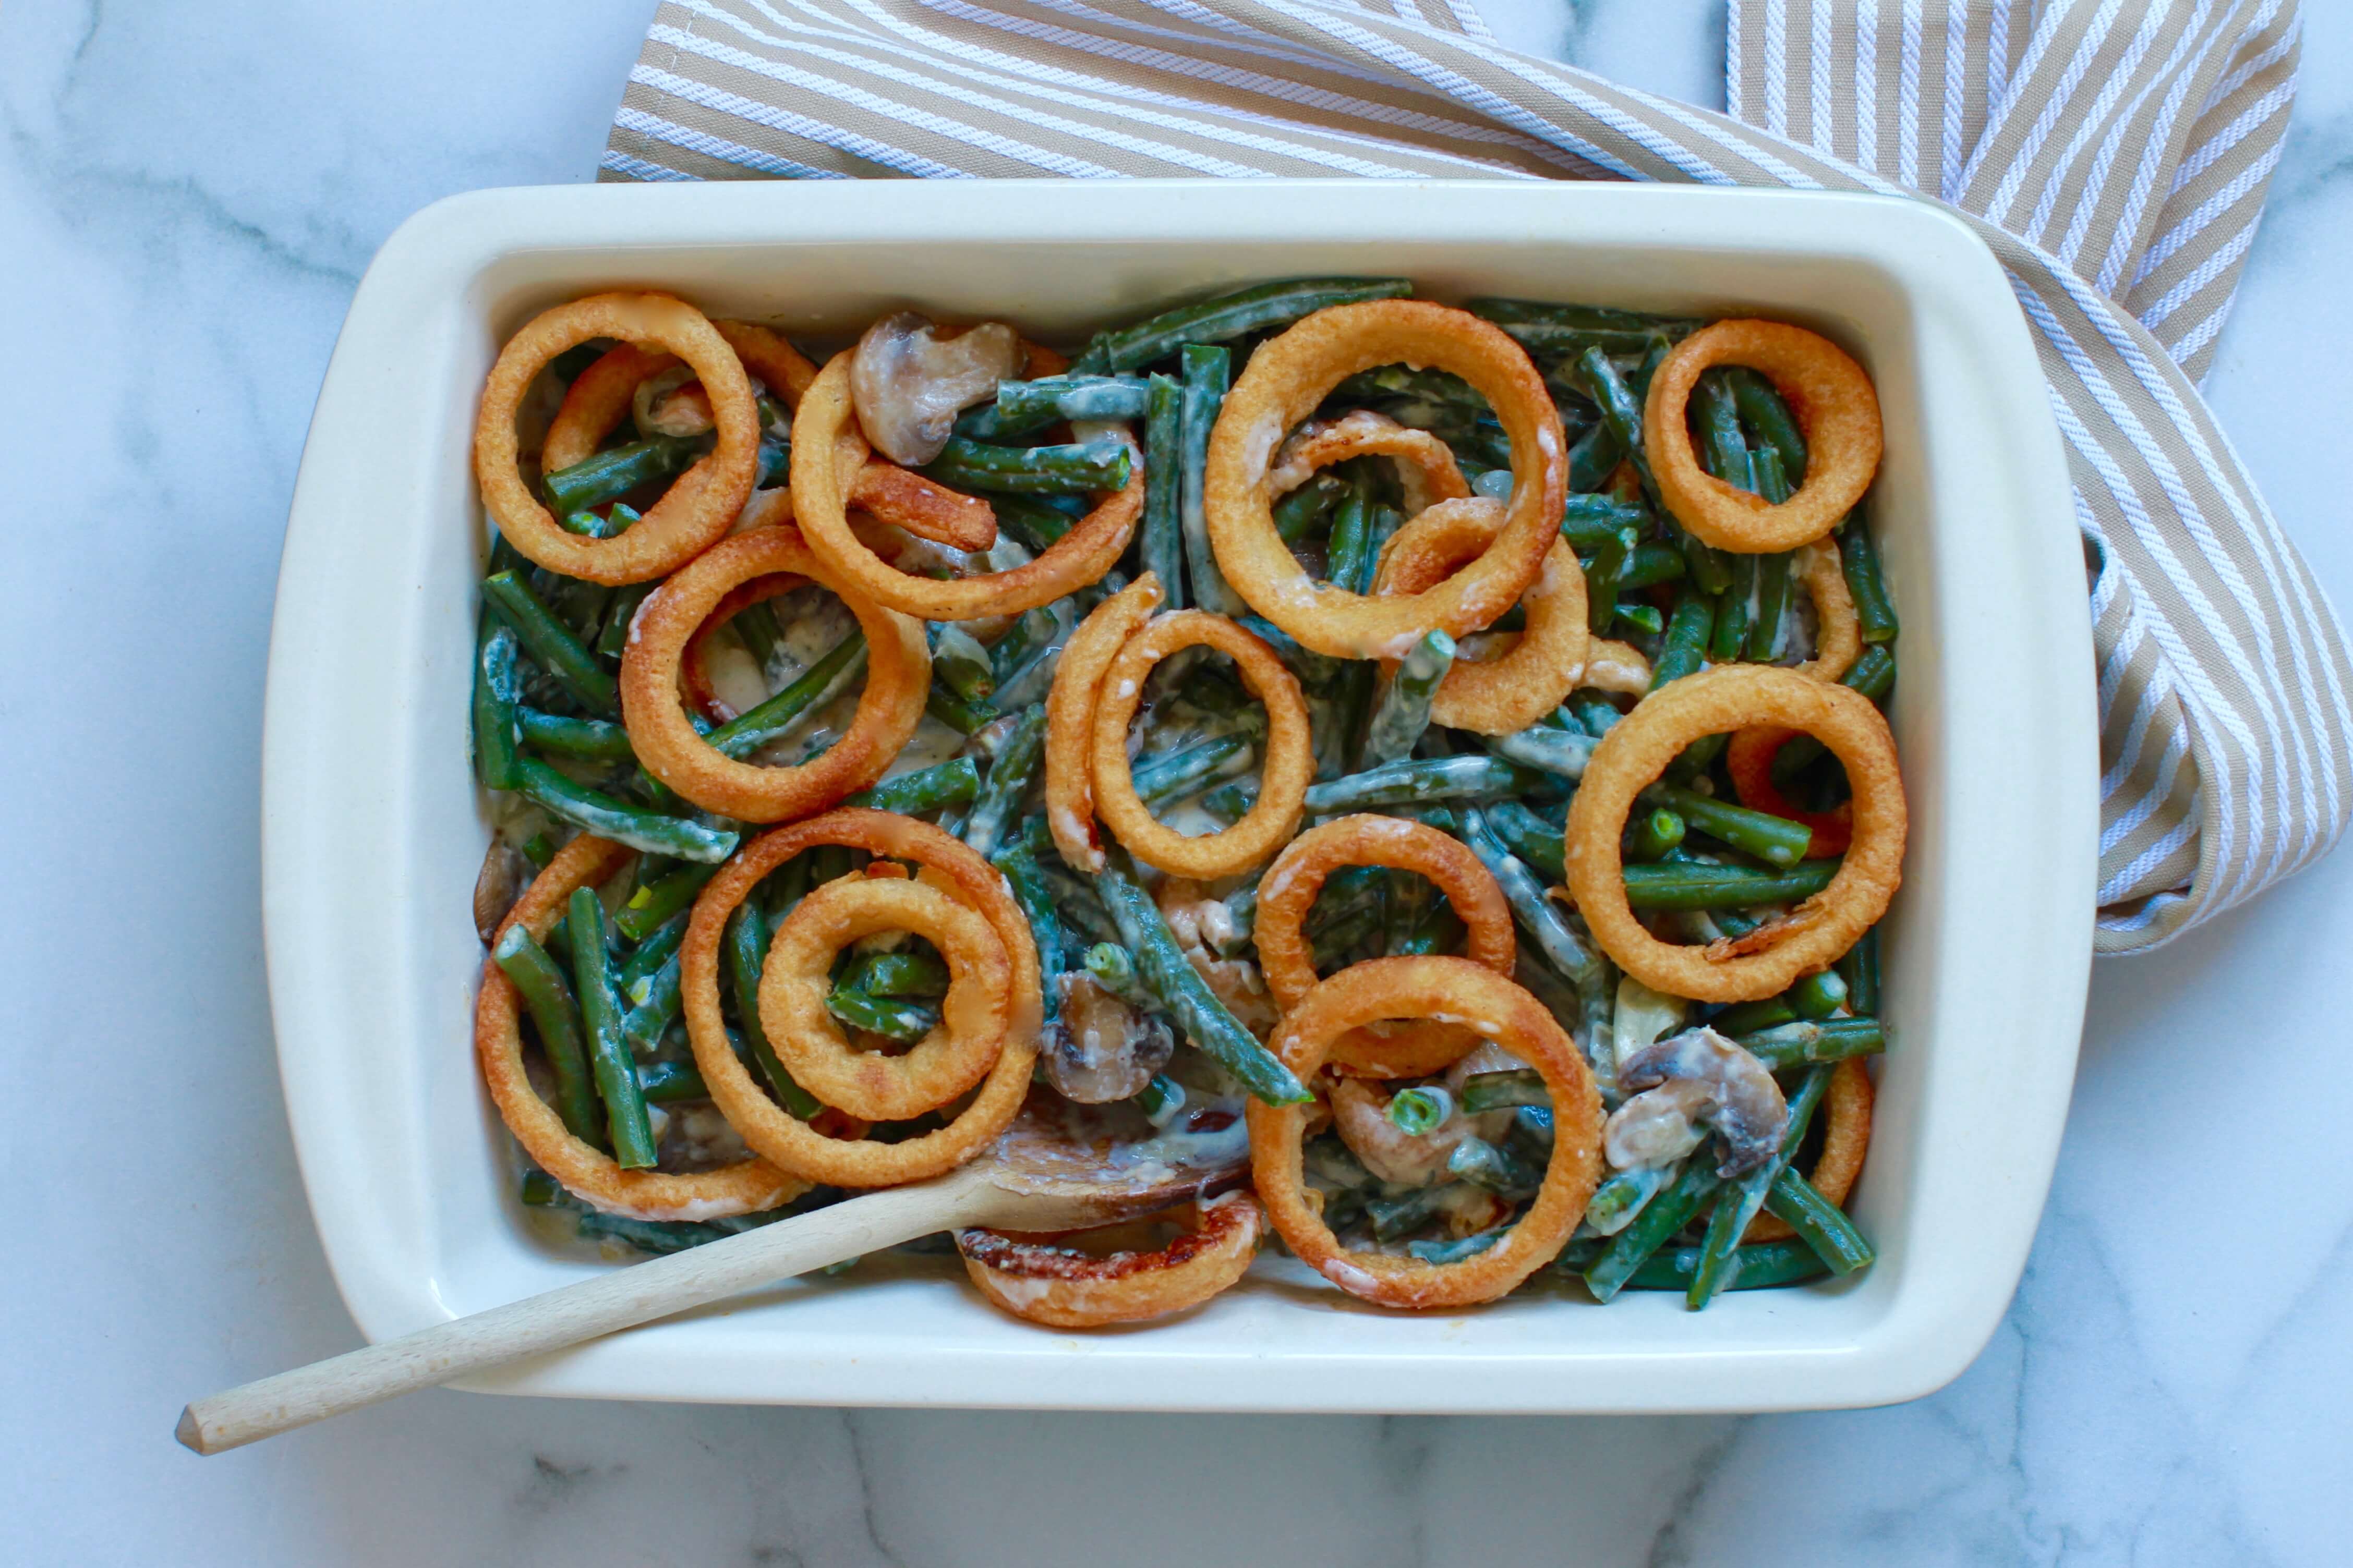 Onion ring and fresh green bean casserole - EverybodyCraves